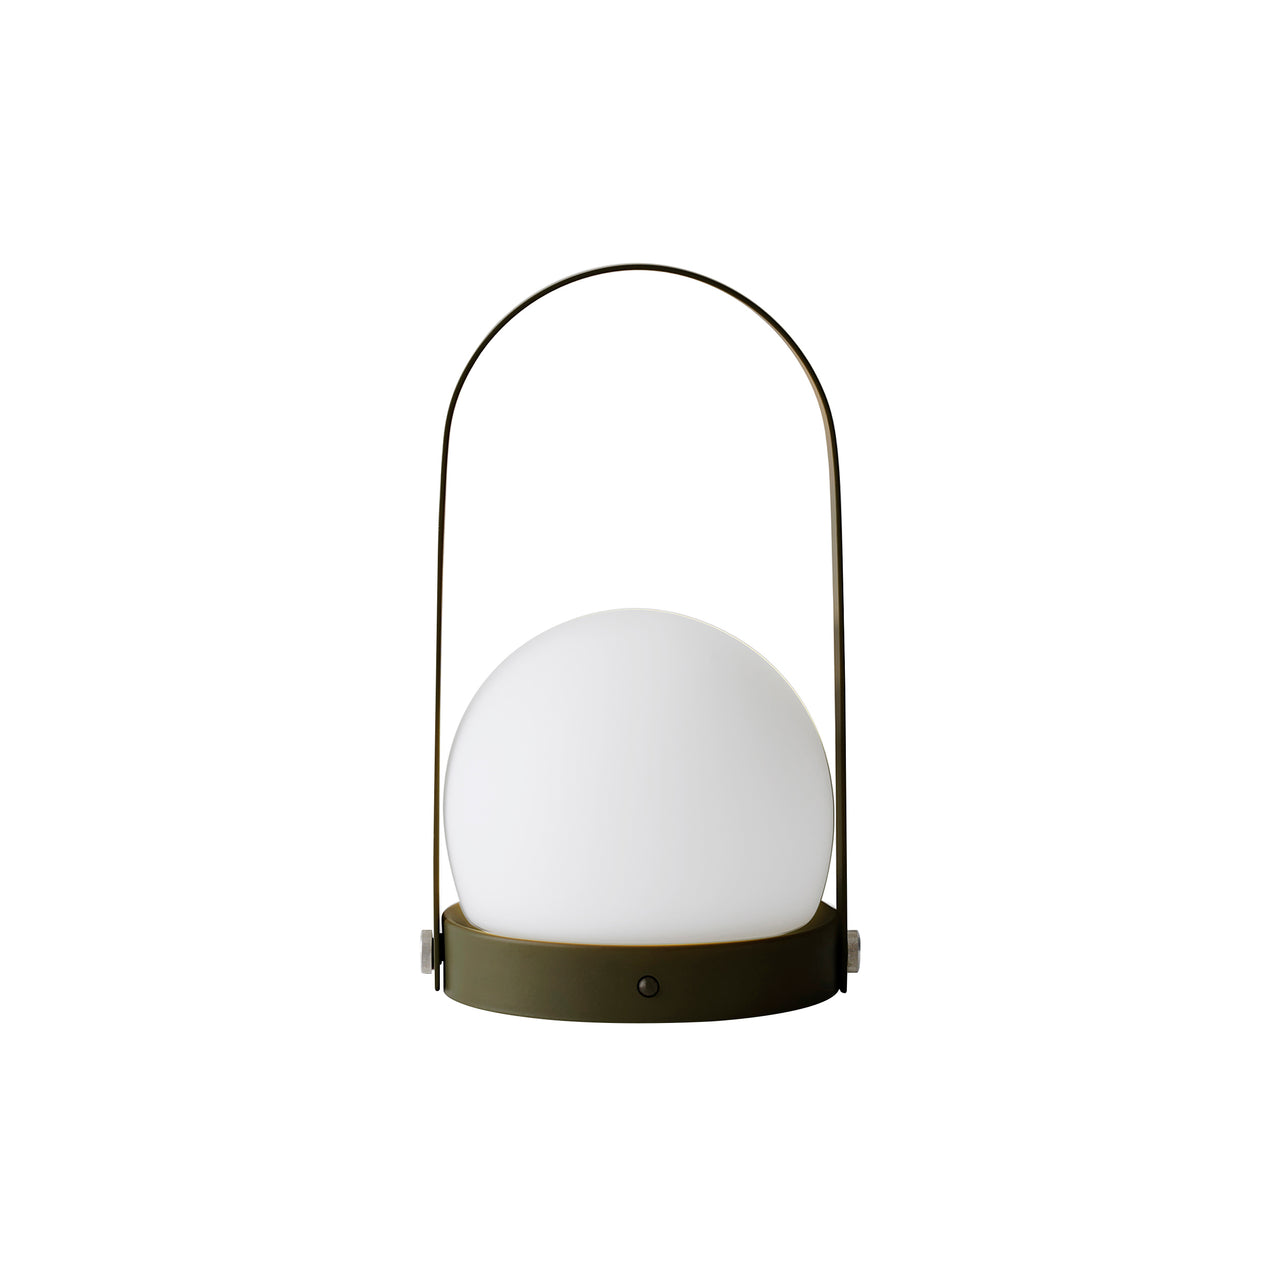 Menu Carrie Portable Table Lamp, Outdoor, Olive